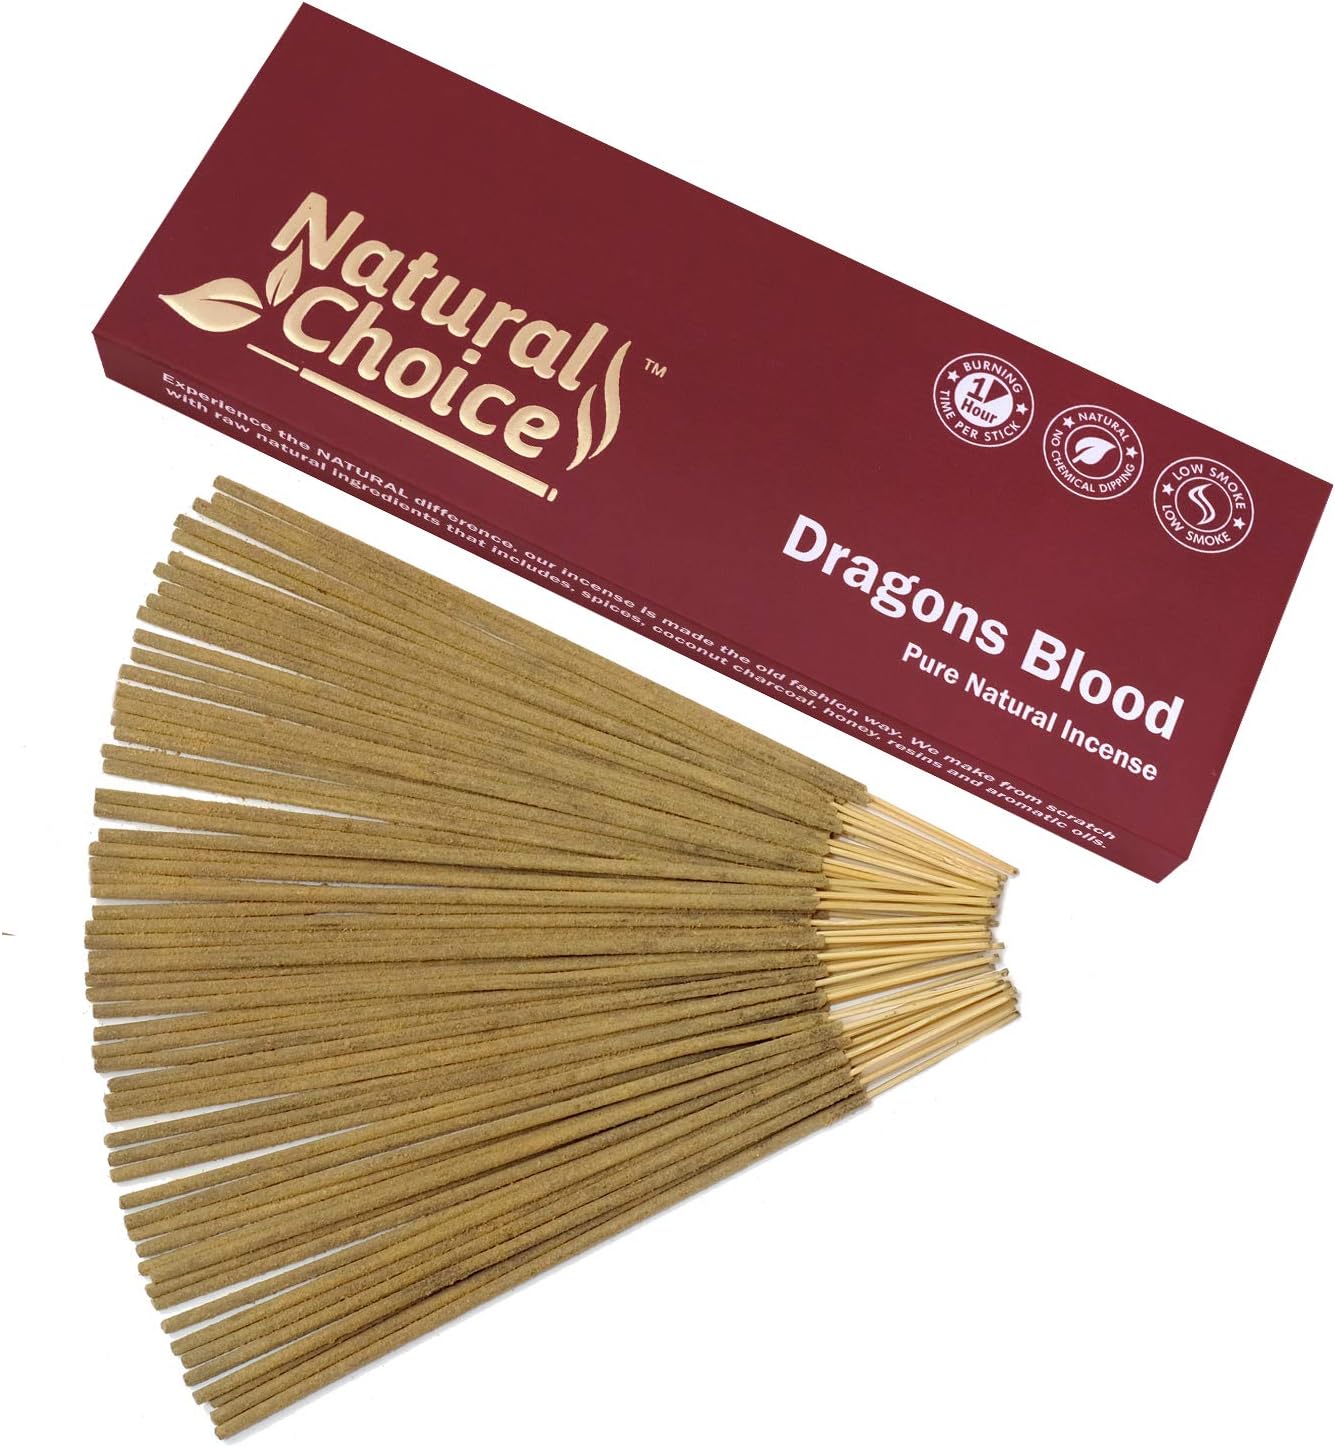 Natural Choice Incense Sandalwood Incense Sticks 100 Grams, Low Smoke Traditional Incense Sticks Made from Scratch, Never Dipped (Sandalwood, Single Pack)